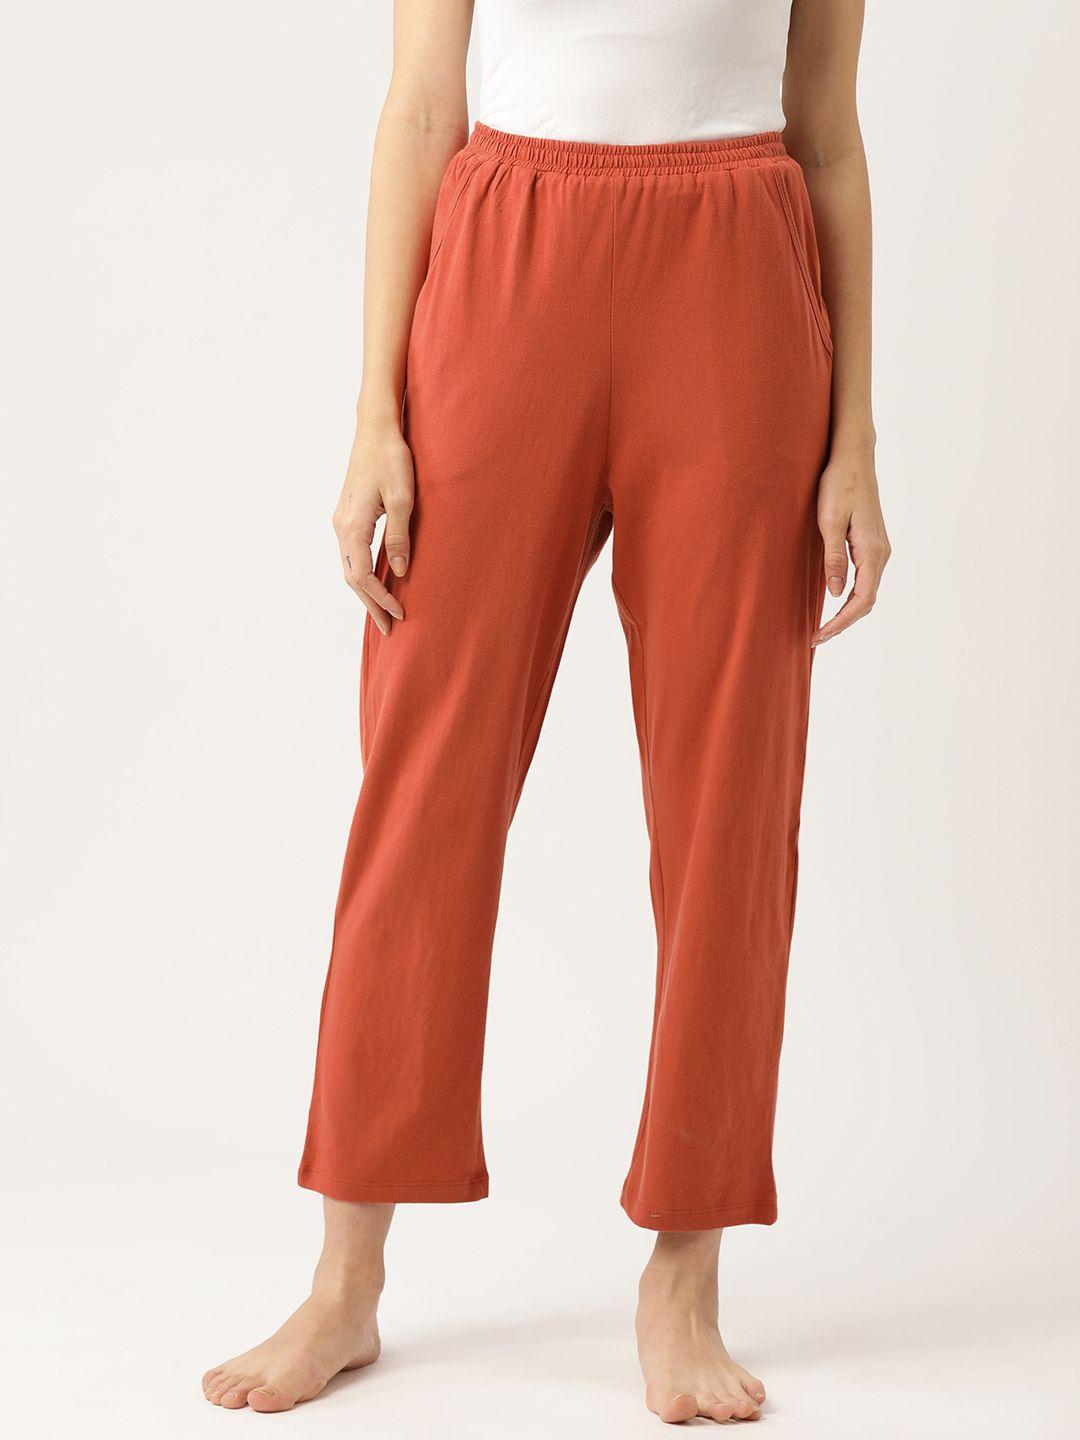 unmade women solid mid-rise lounge pants